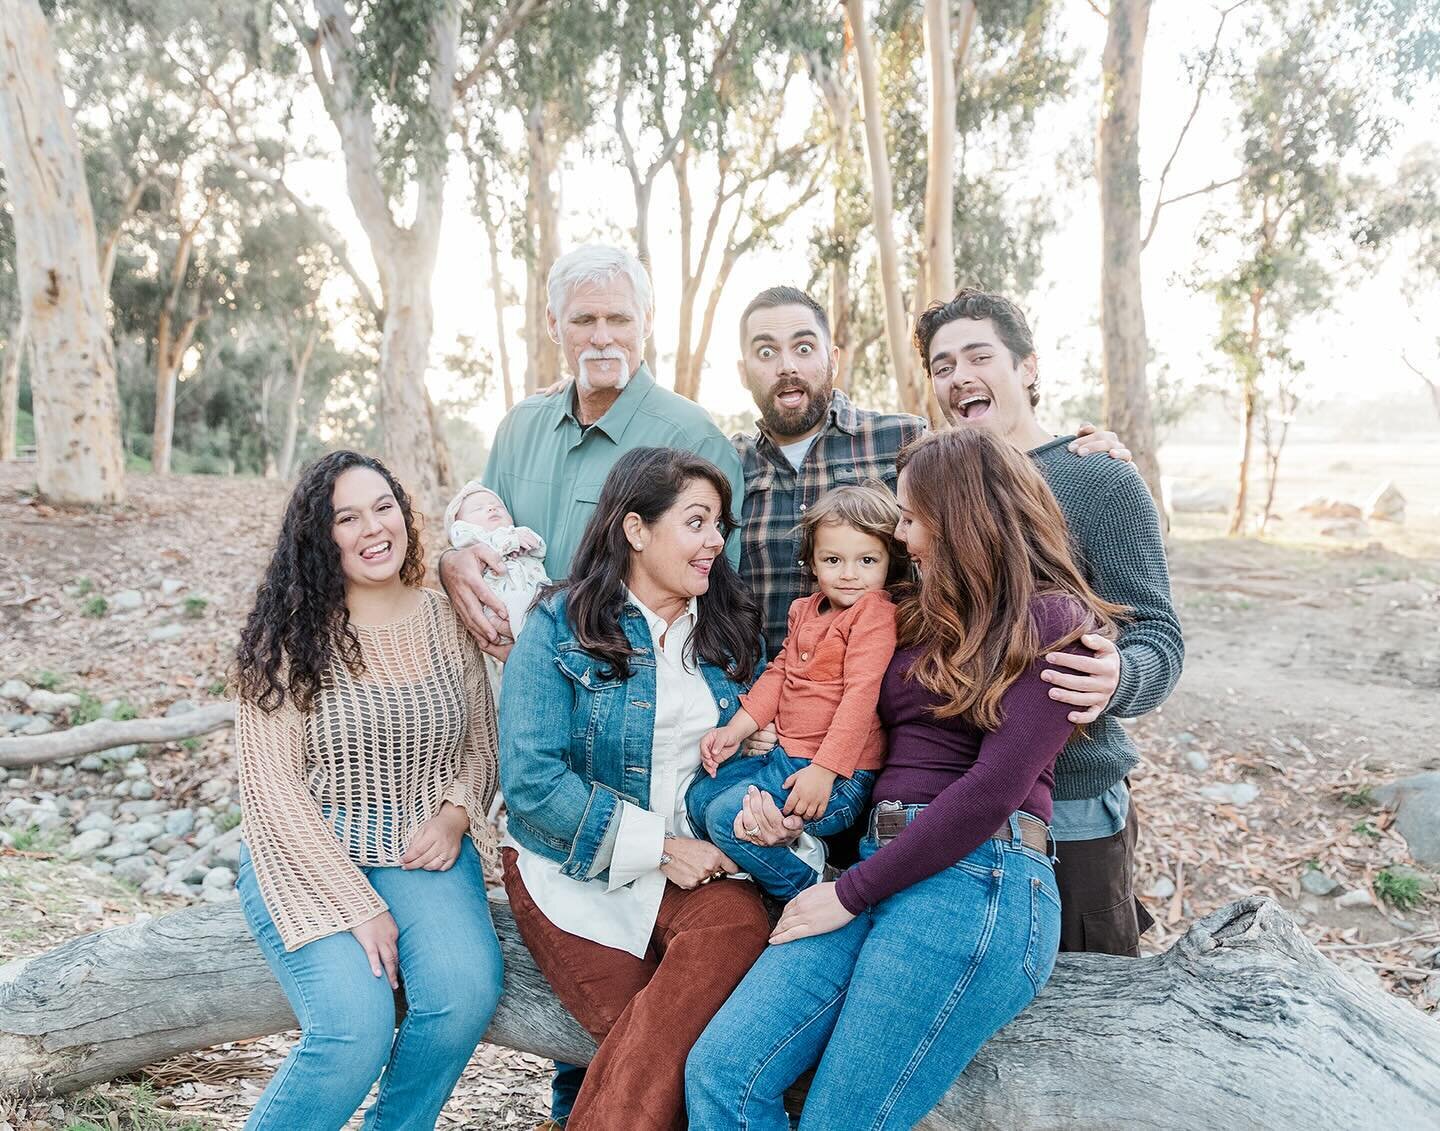 When everyone does a silly face except for the one who&rsquo;s always doing silly faces 😜 what&rsquo;s not to love about that little smirk though!

More photos from my time with the Schmidt family are up on the blog today! Link in bio.